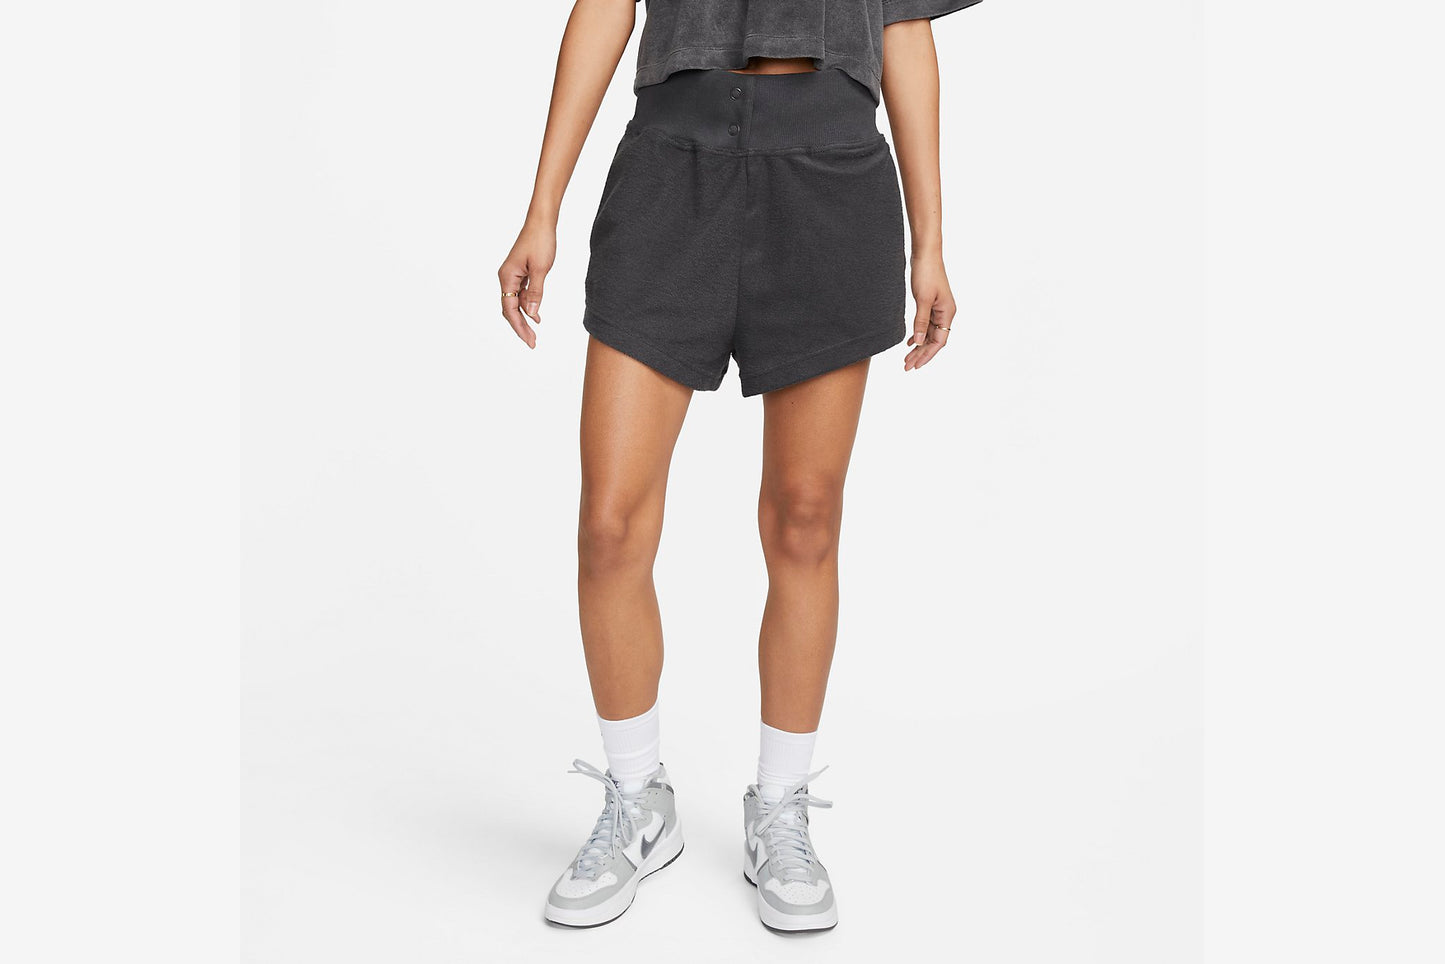 Nike "High-Waisted Reverse" French Terry Short W - Anthracite/Anthracite/Black